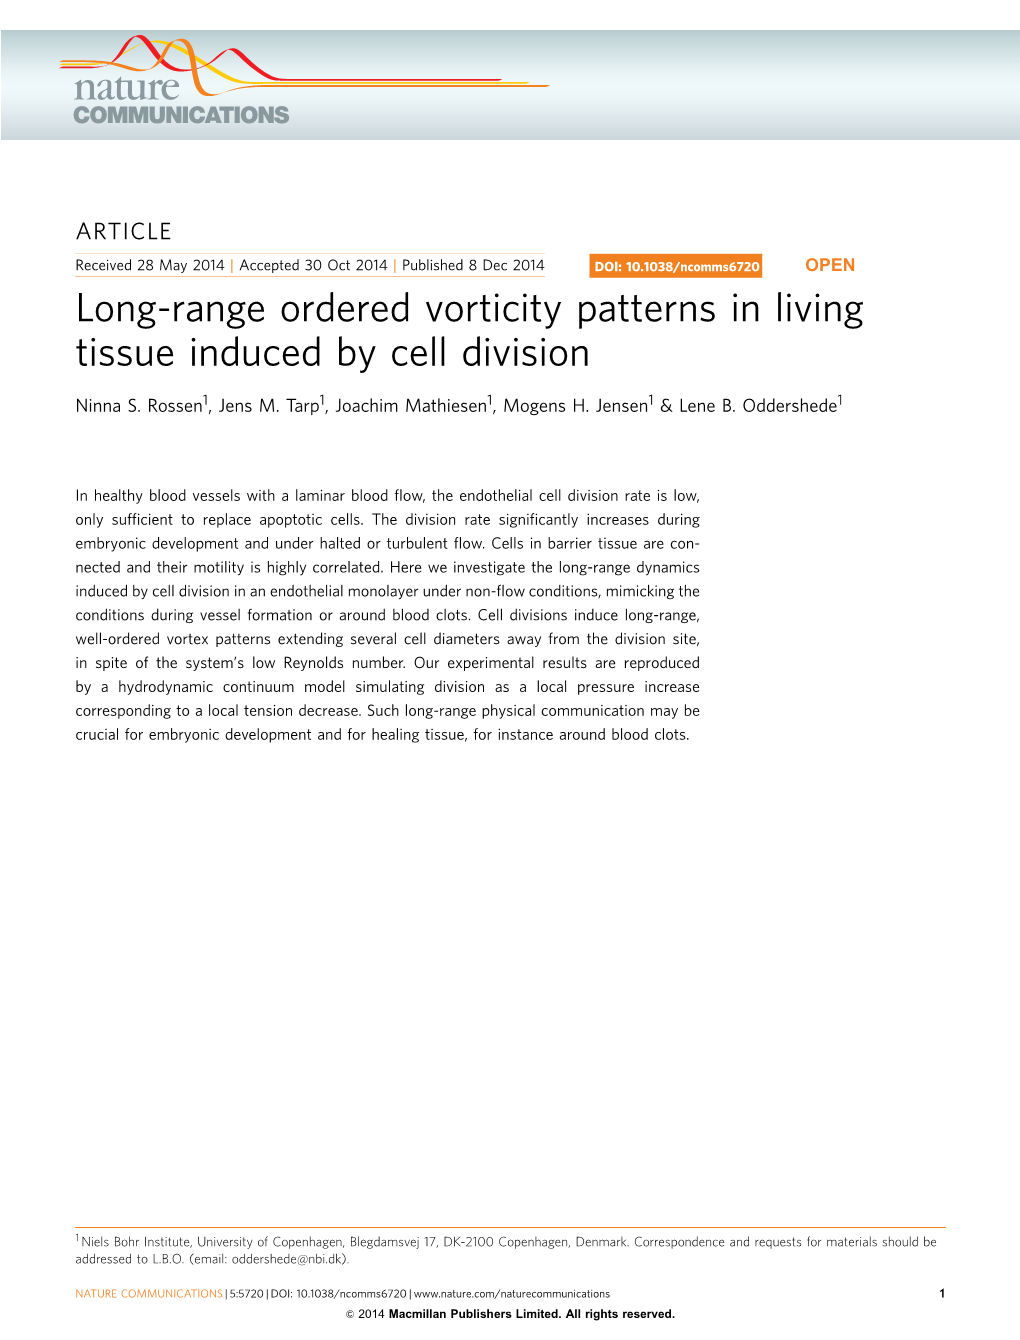 Long-Range Ordered Vorticity Patterns in Living Tissue Induced by Cell Division